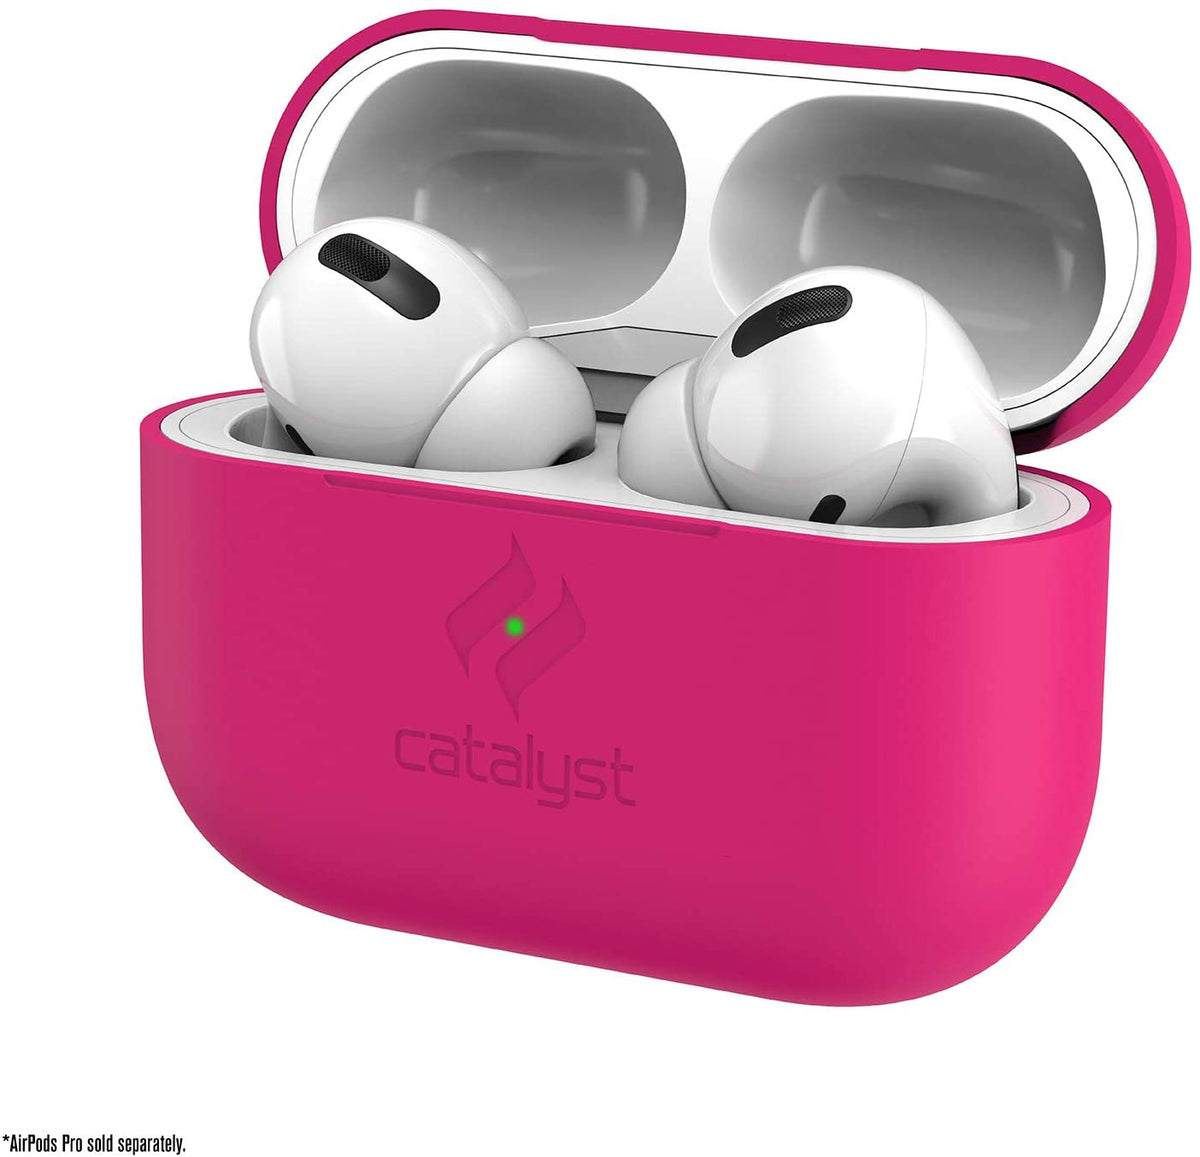 [OPEN BOX] CATALYST Slim Case for AirPods Pro - Neon Pink